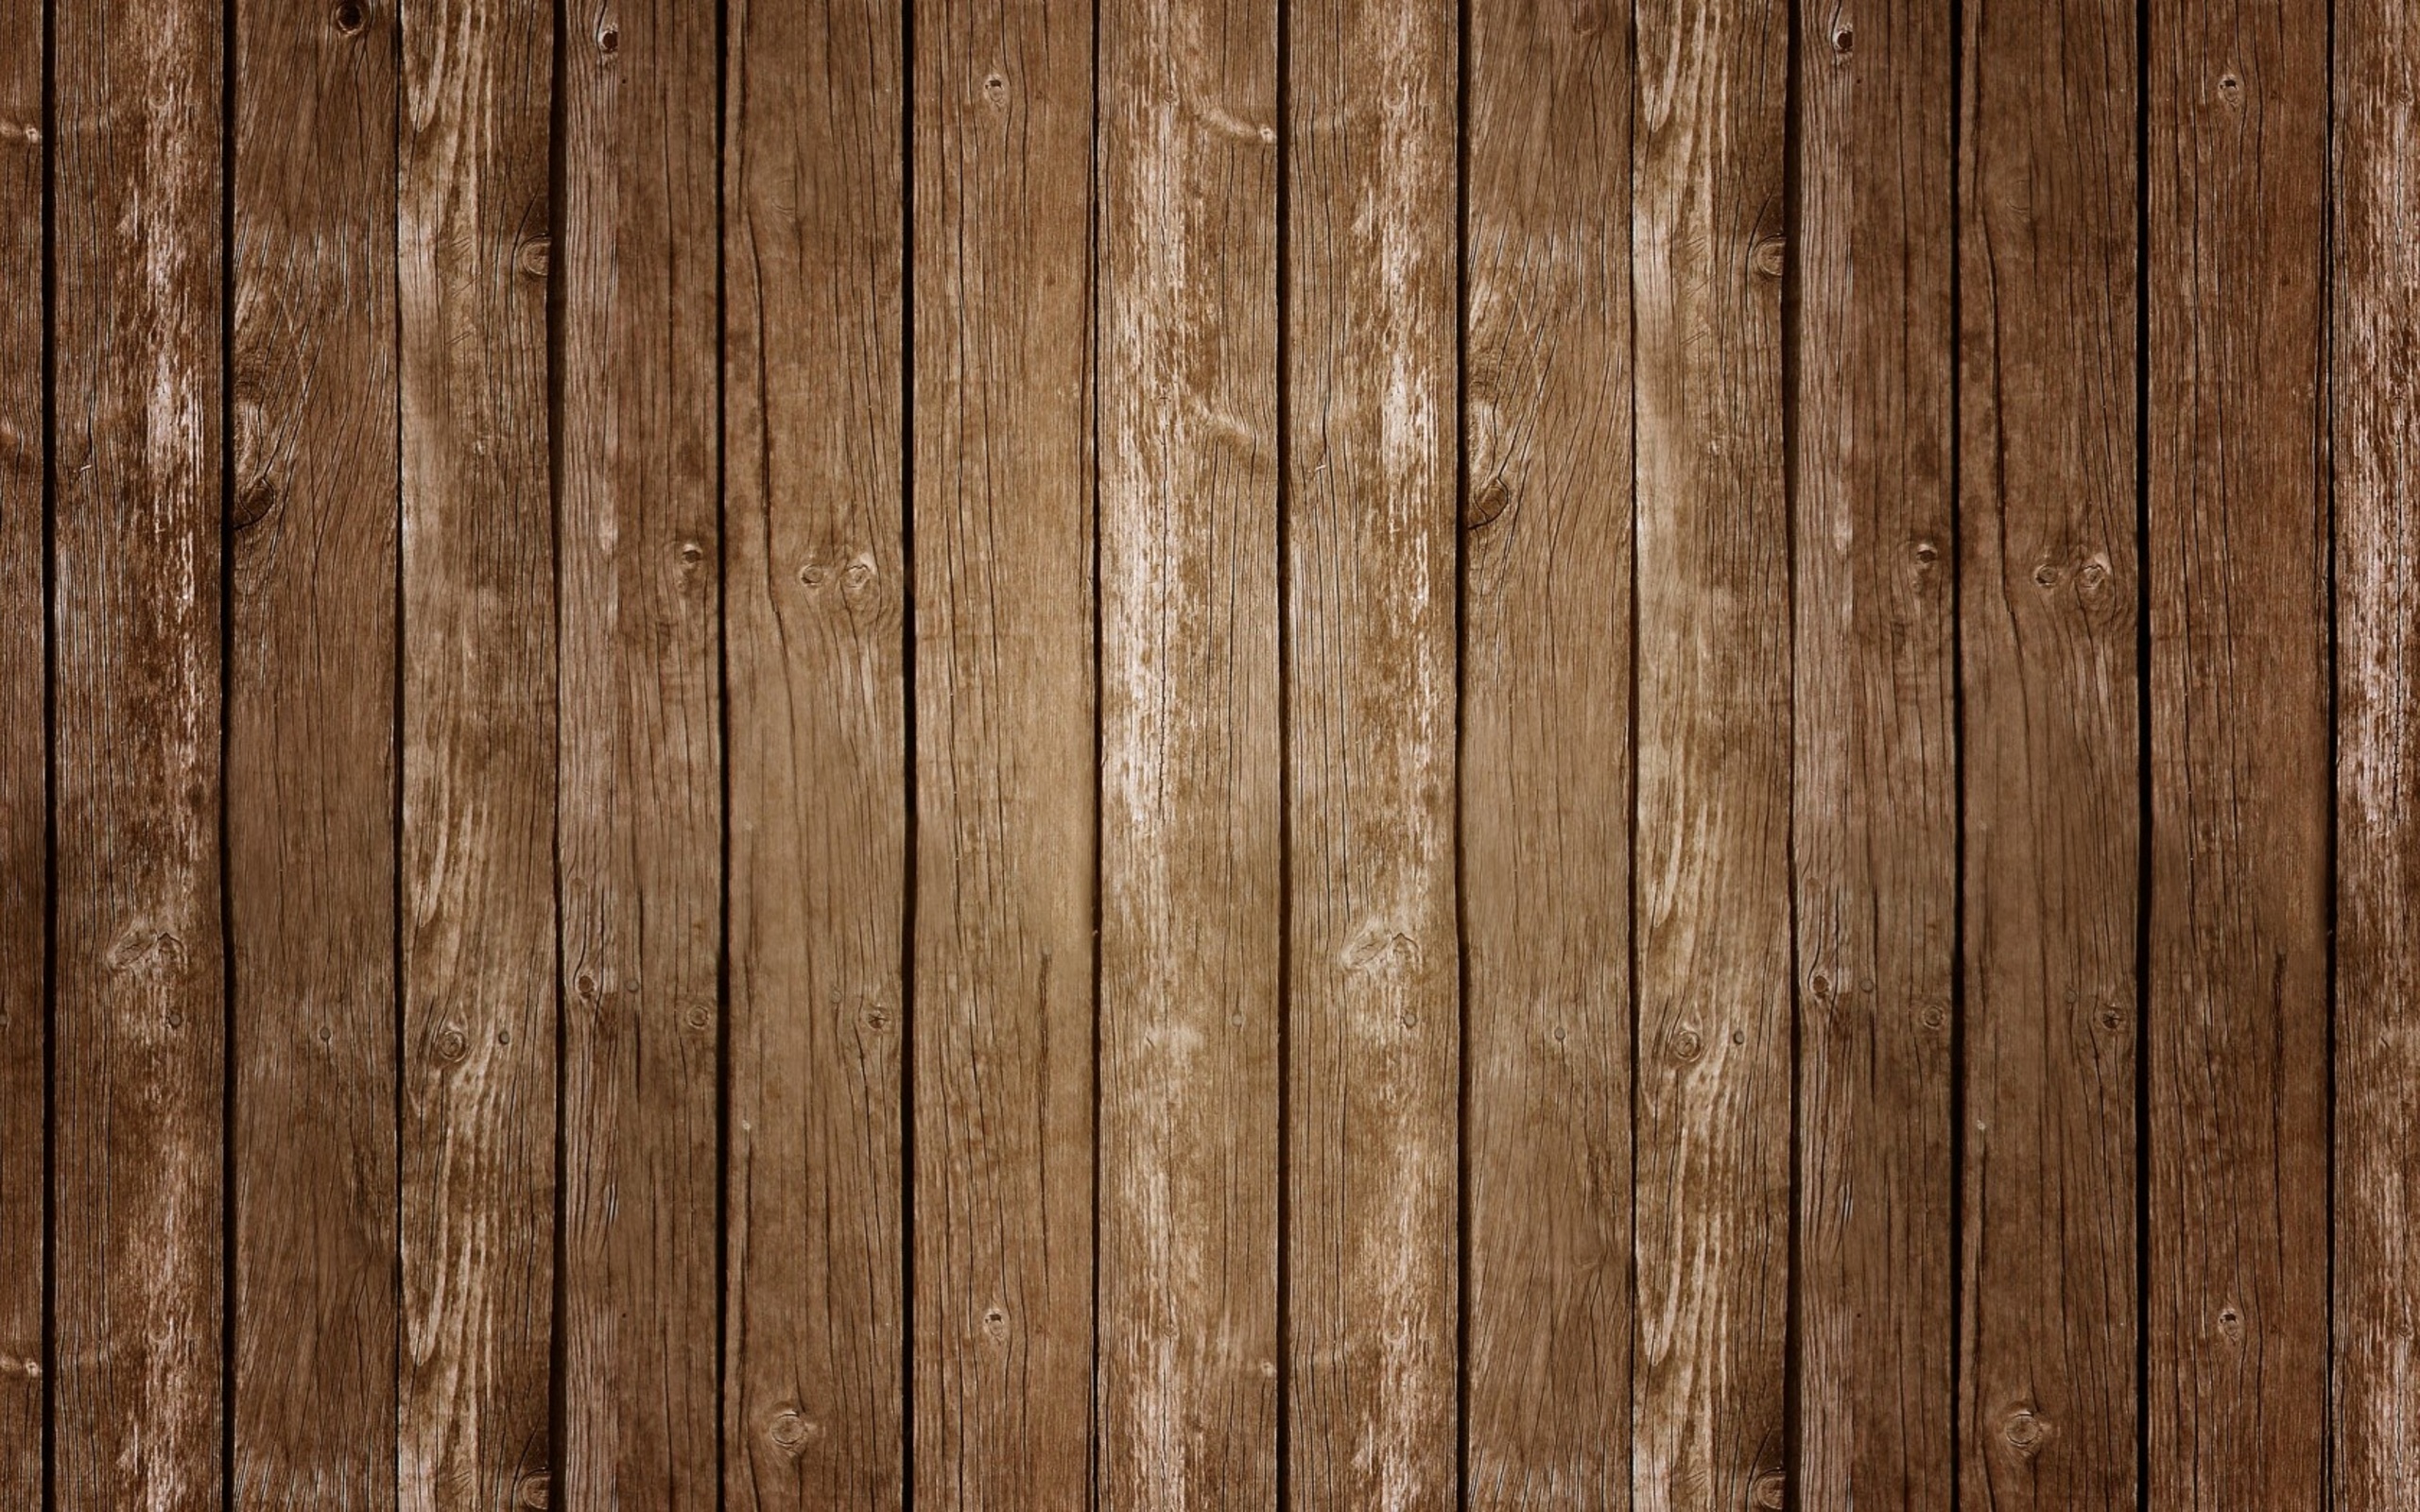     Images For Websites  2   Original Wood   Hd Wallpapers For Free